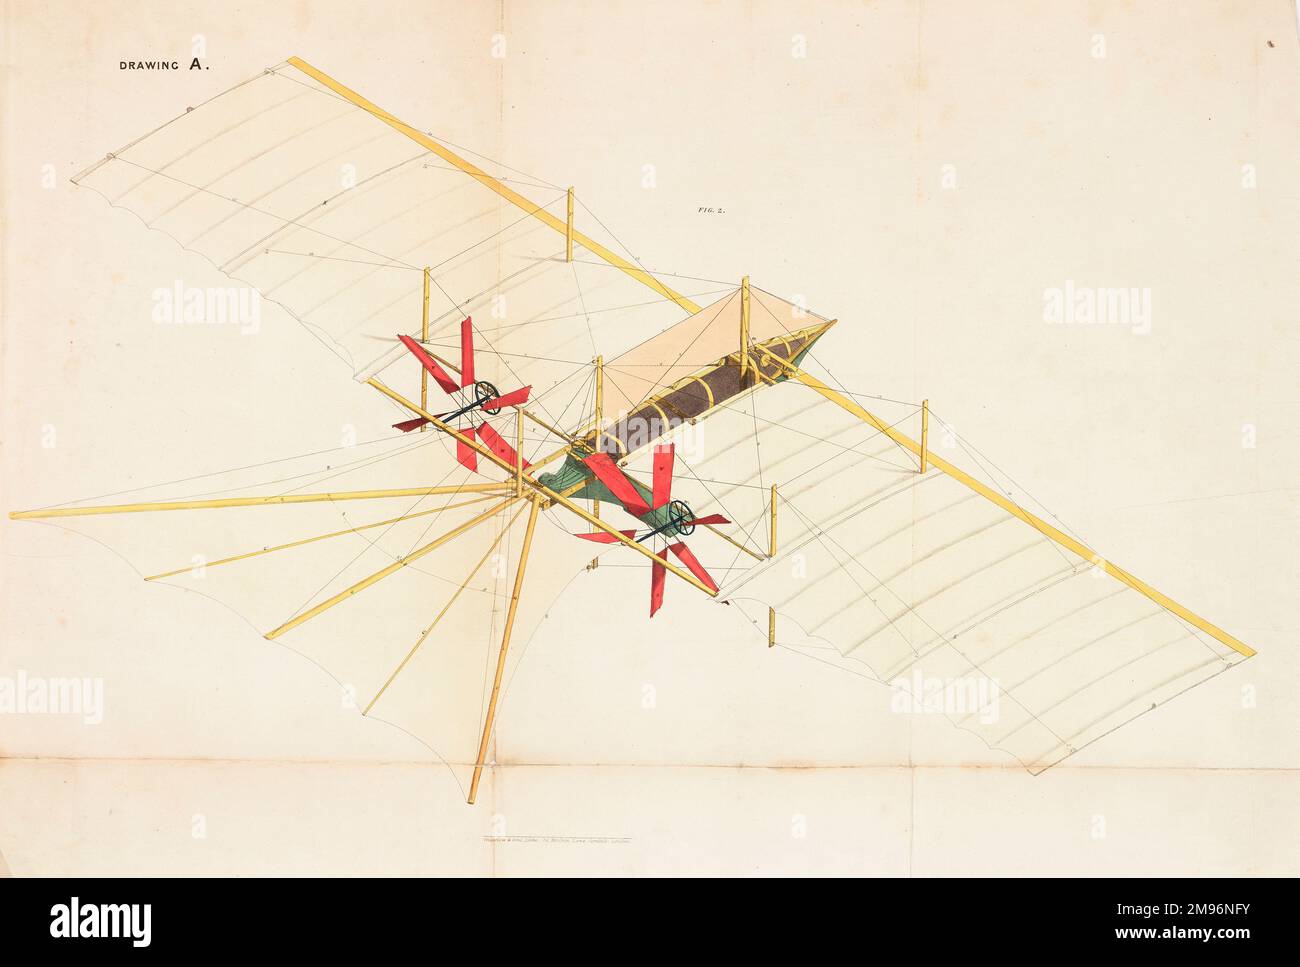 The Aerial Steam Carriage -- view with covering fabric in place. This flying machine was patented by William Samuel Henson (1812-1888) and John Stringfellow (1799-1883) in 1842. Stock Photo